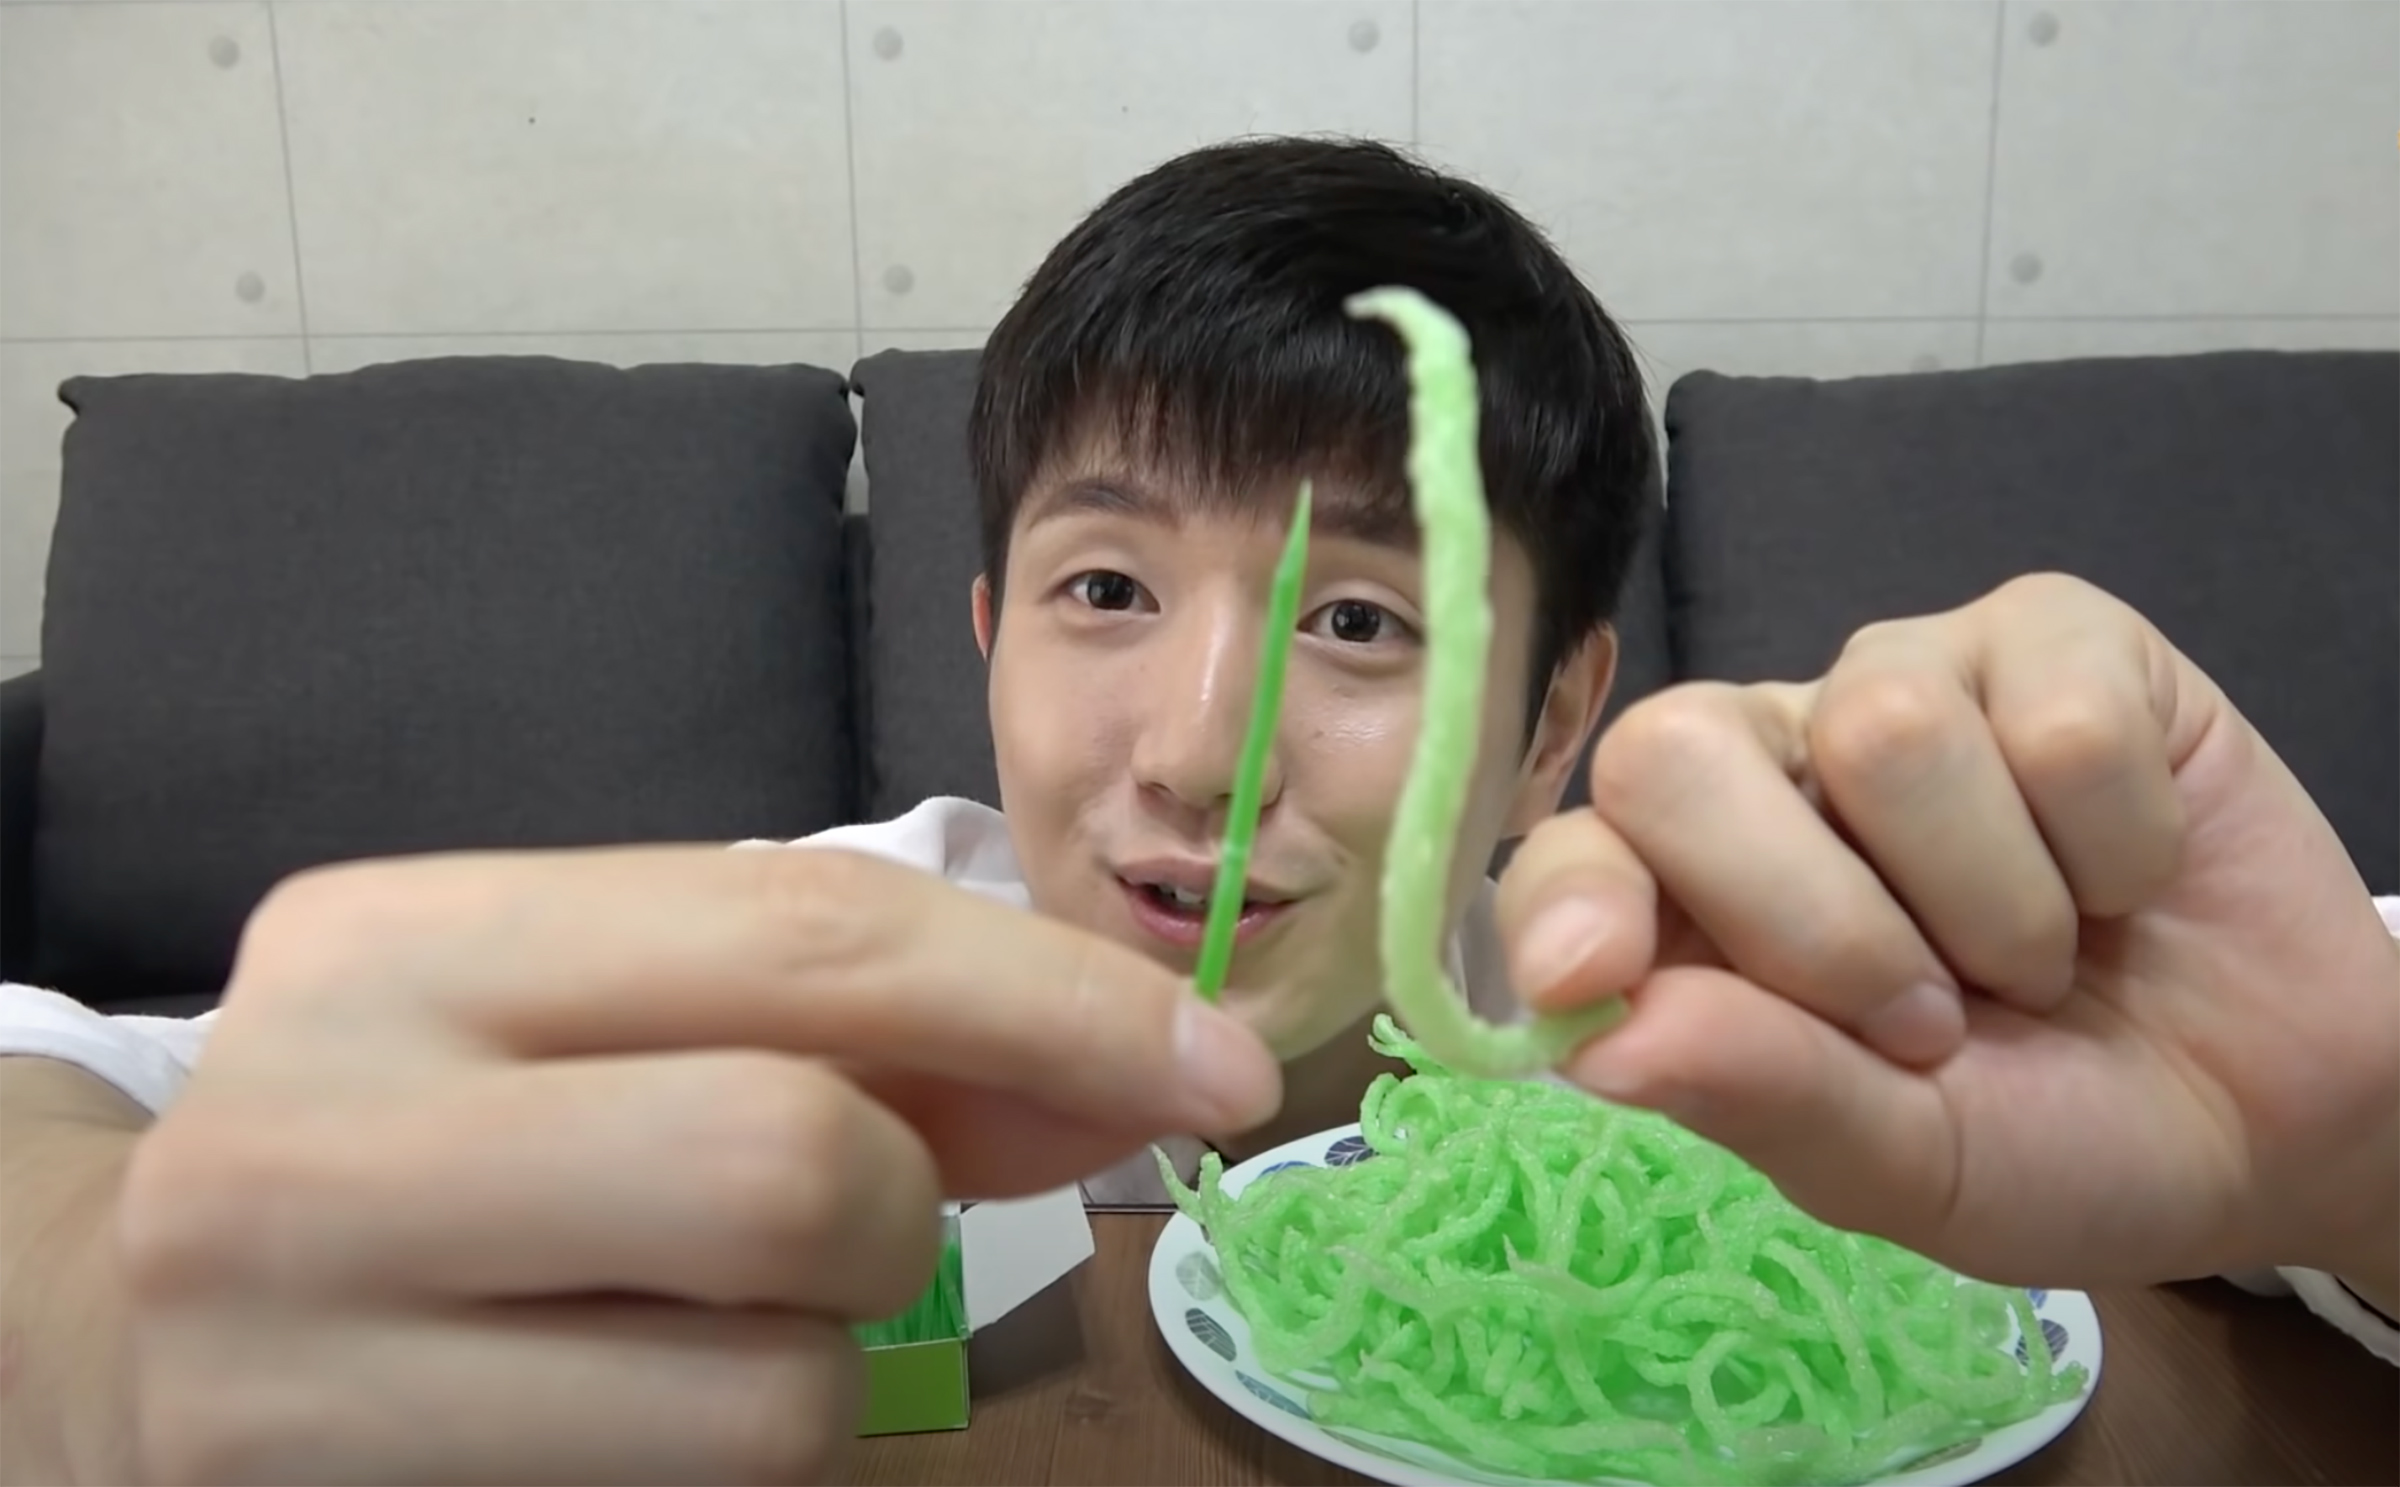 A screengrab from Ssot815's mukbang video featuring fried toothpicks.